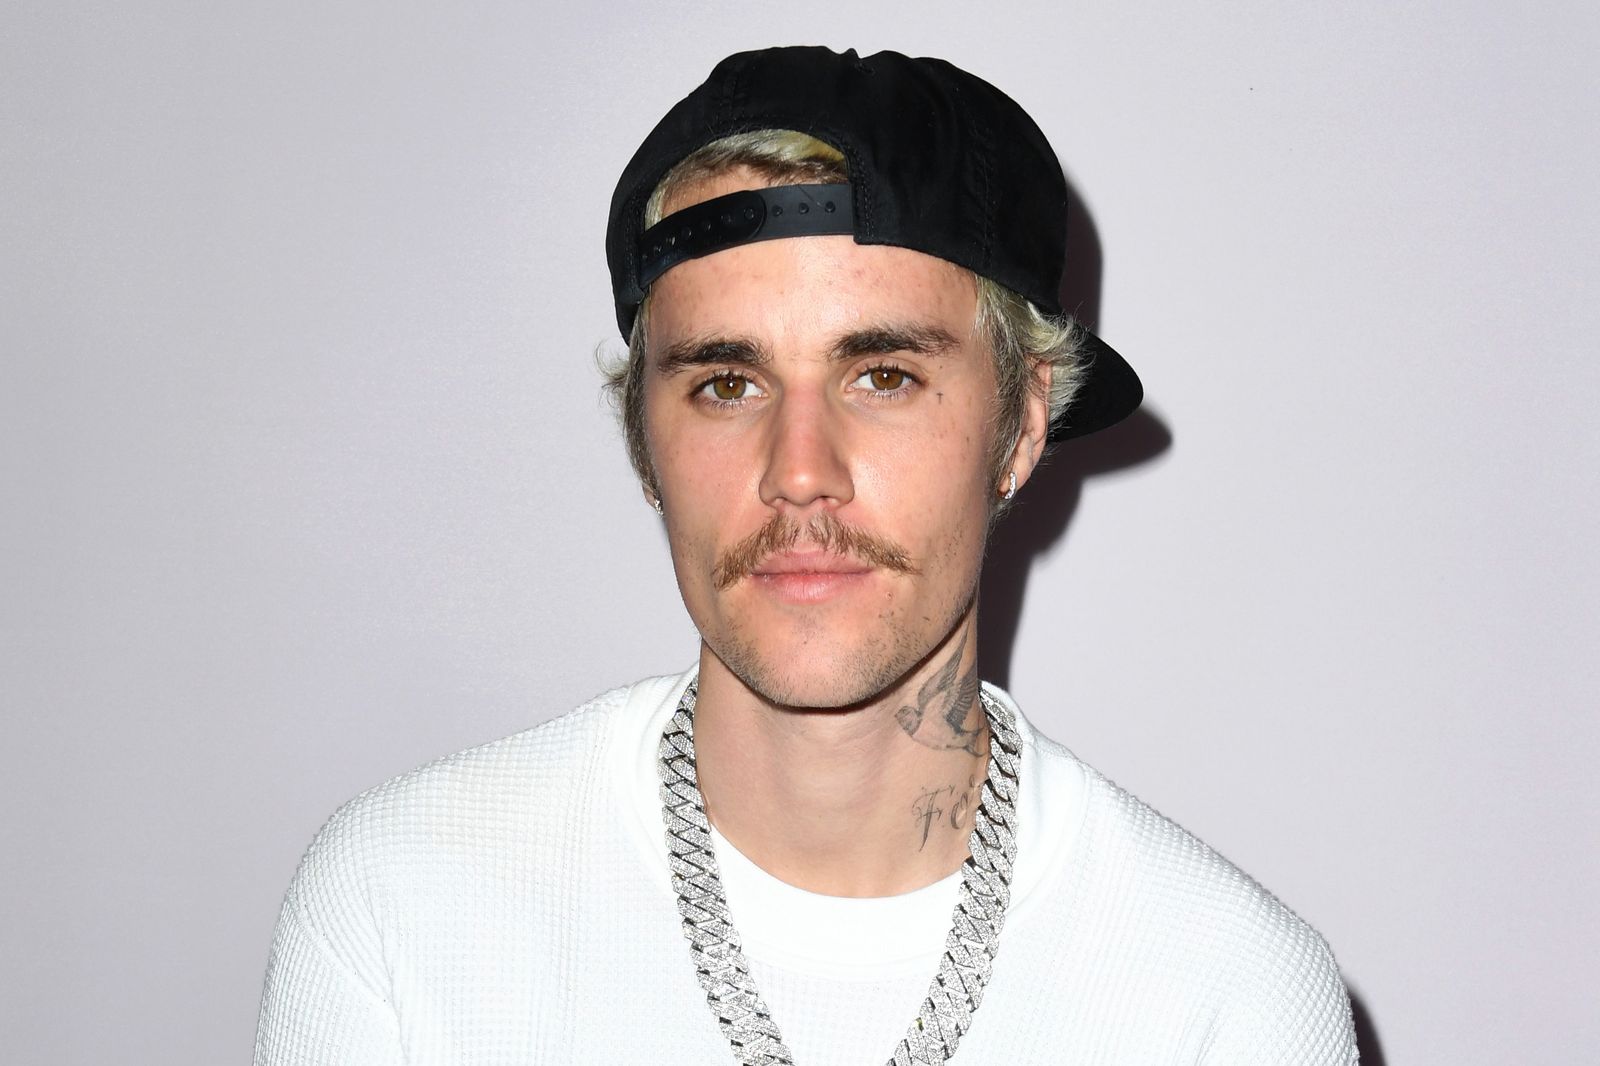 Justin Bieber stopped singing: Can't perform because of facial ...